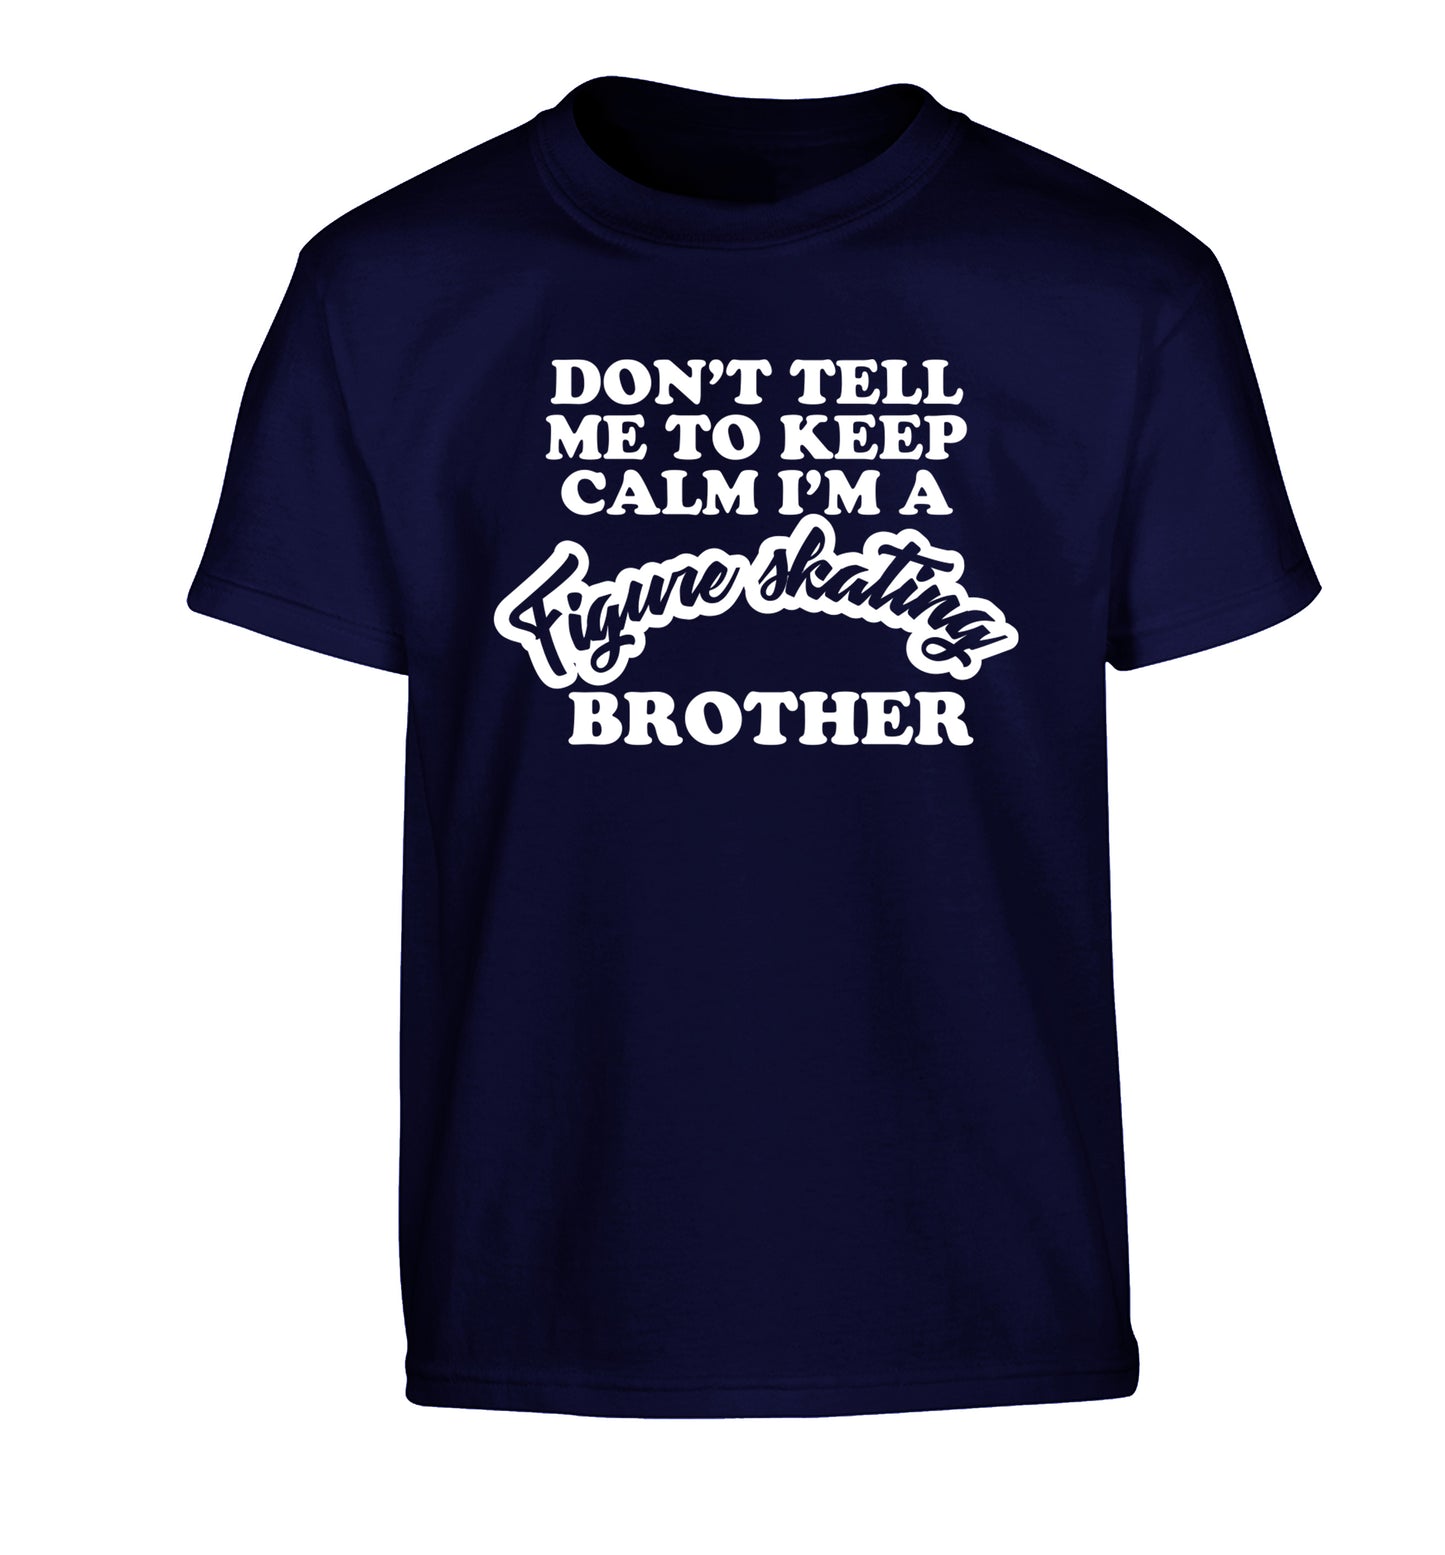 Don't tell me to keep calm I'm a figure skating brother Children's navy Tshirt 12-14 Years